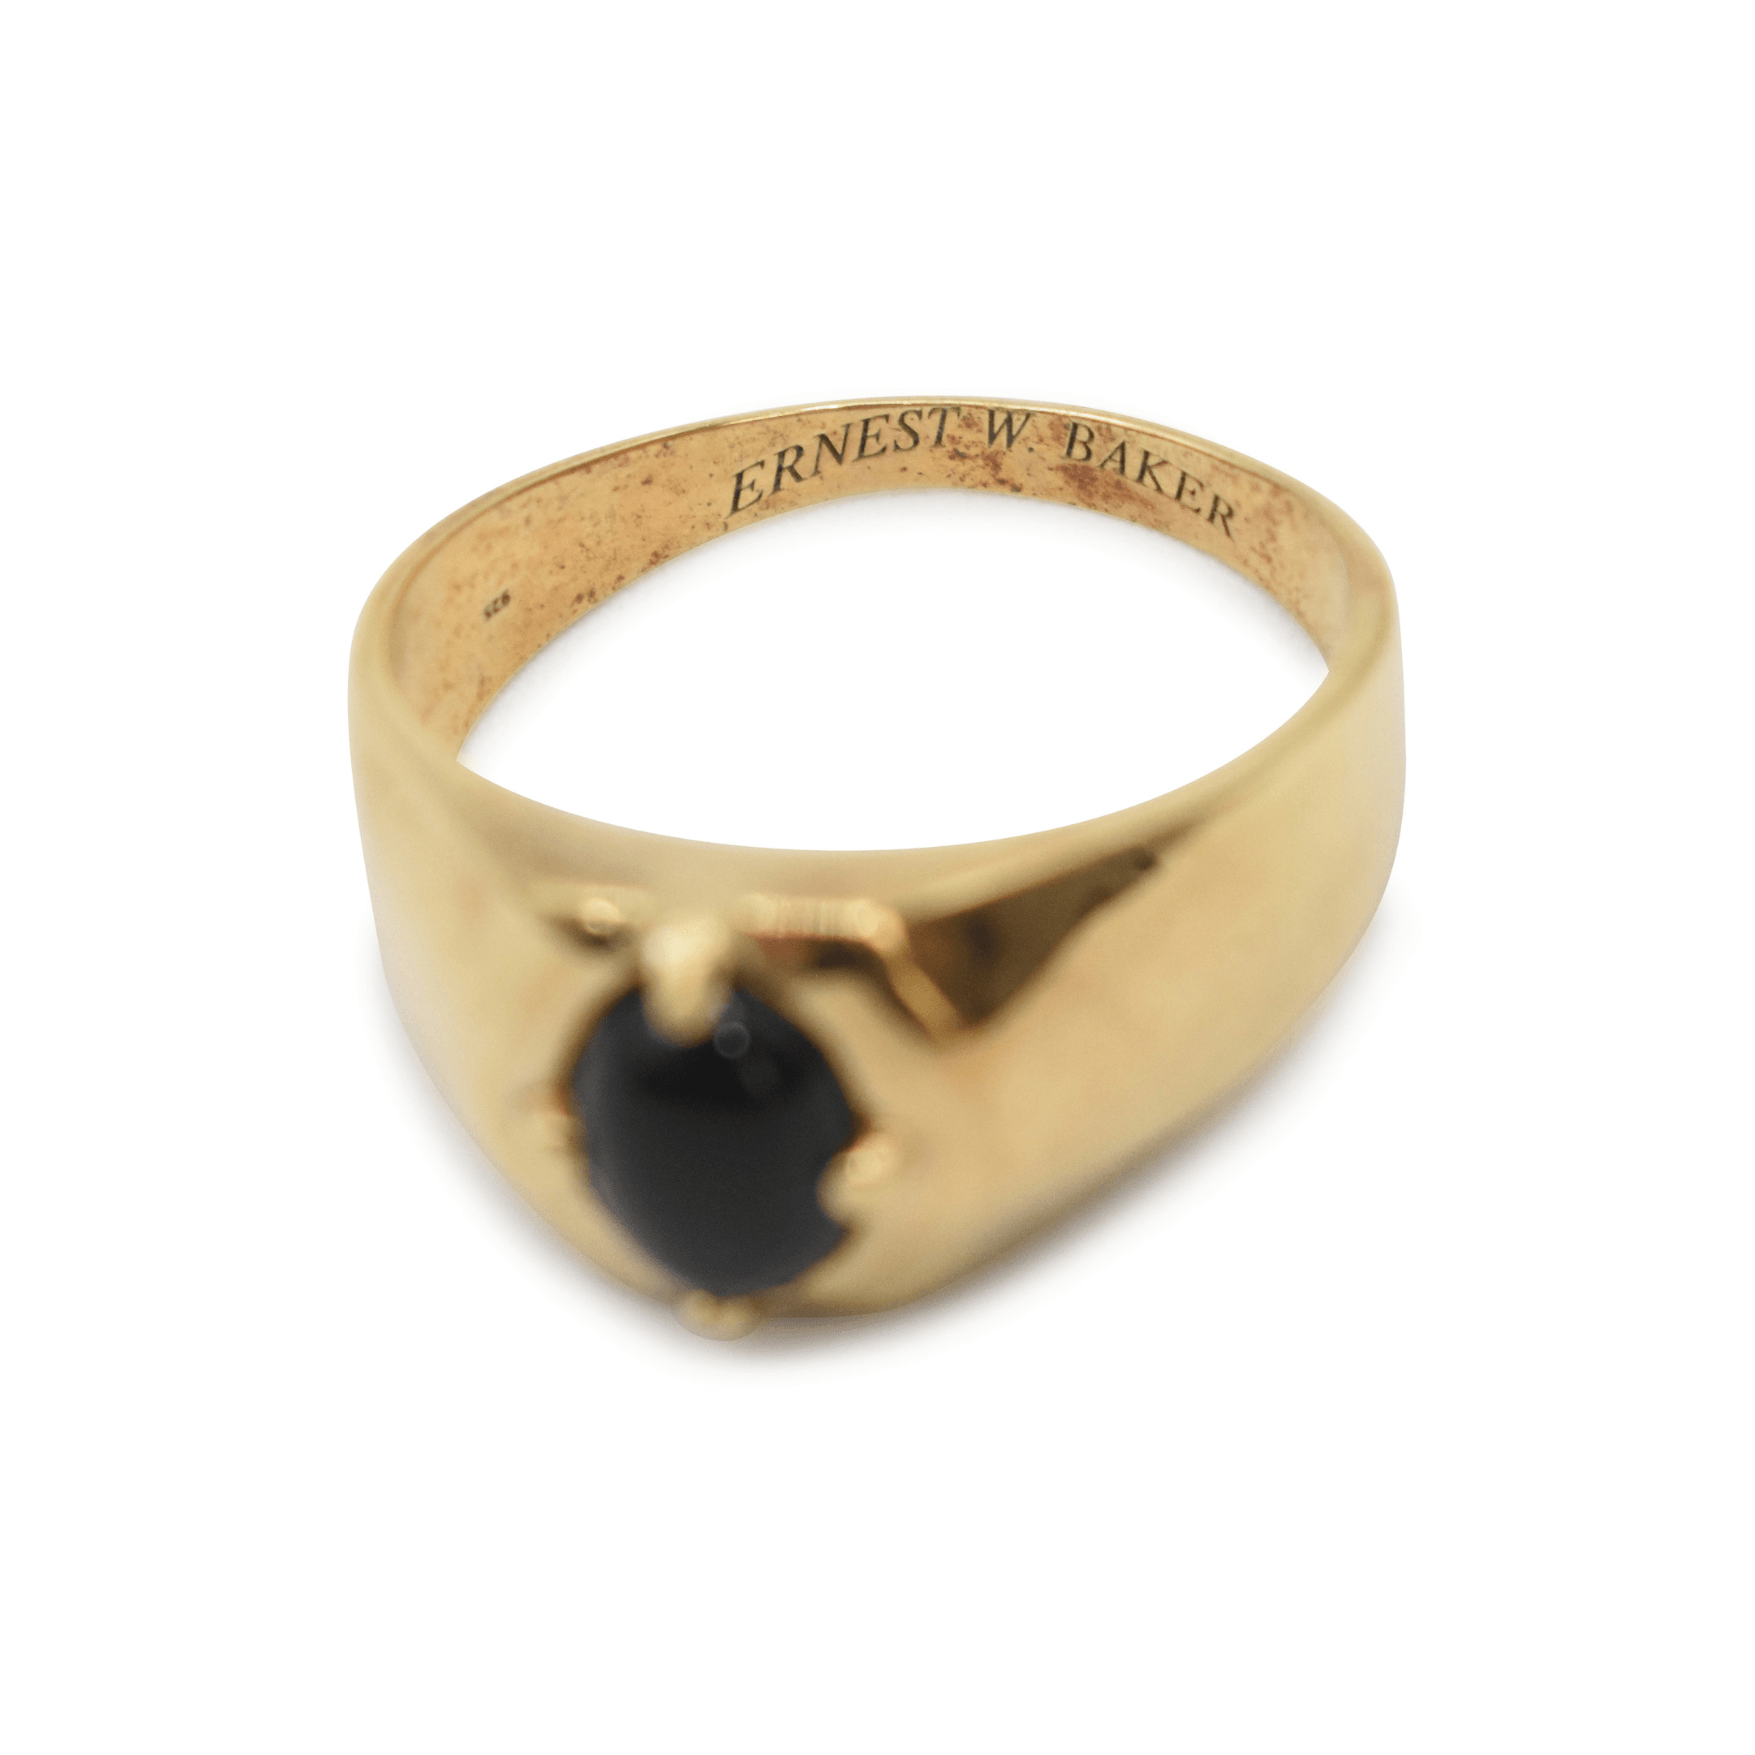 Ernest W. Baker Ring - 10.5 - Fashionably Yours